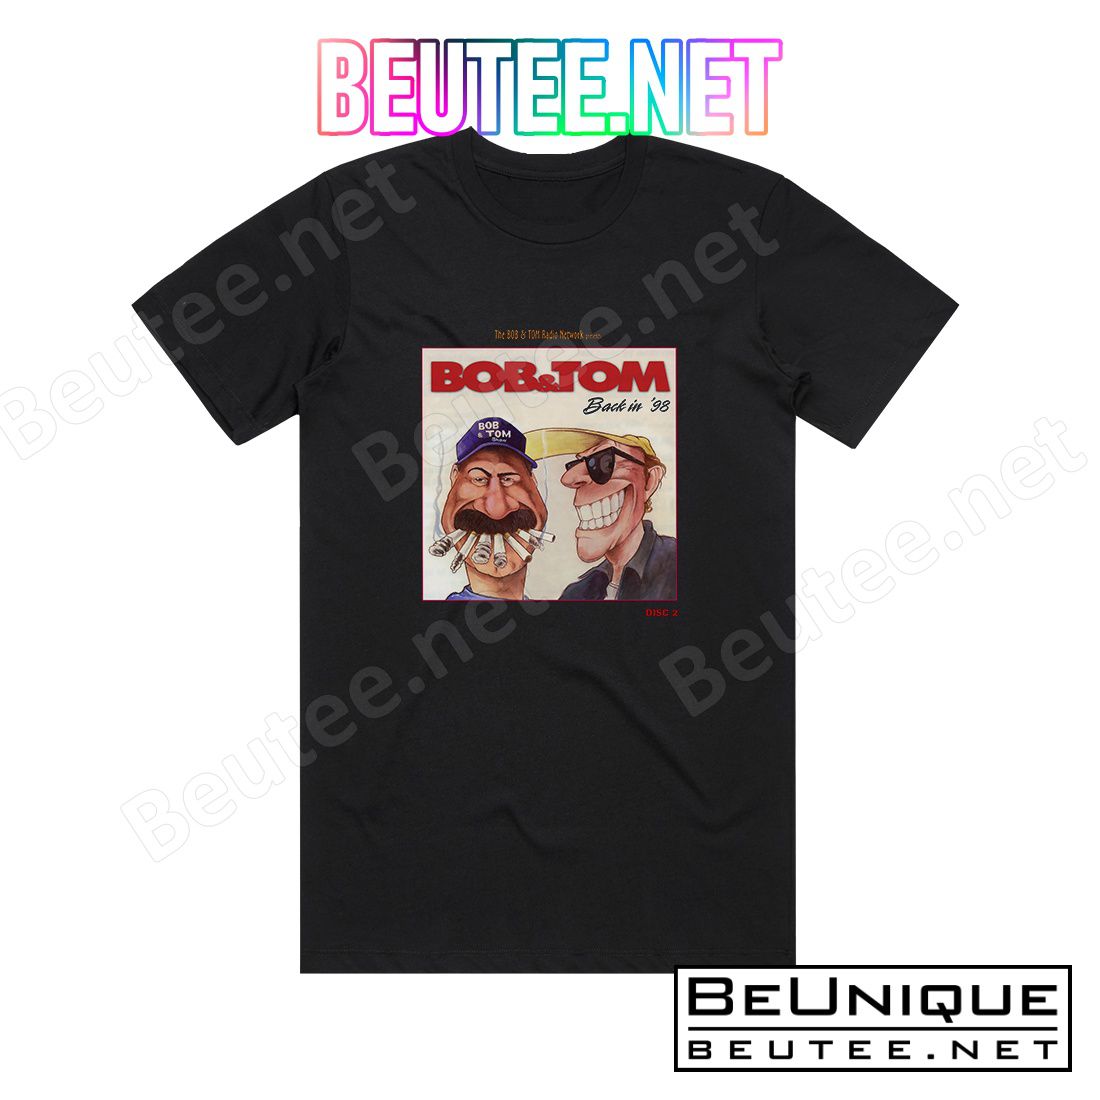 Bob and Tom Back In 98 2 Album Cover T-Shirt